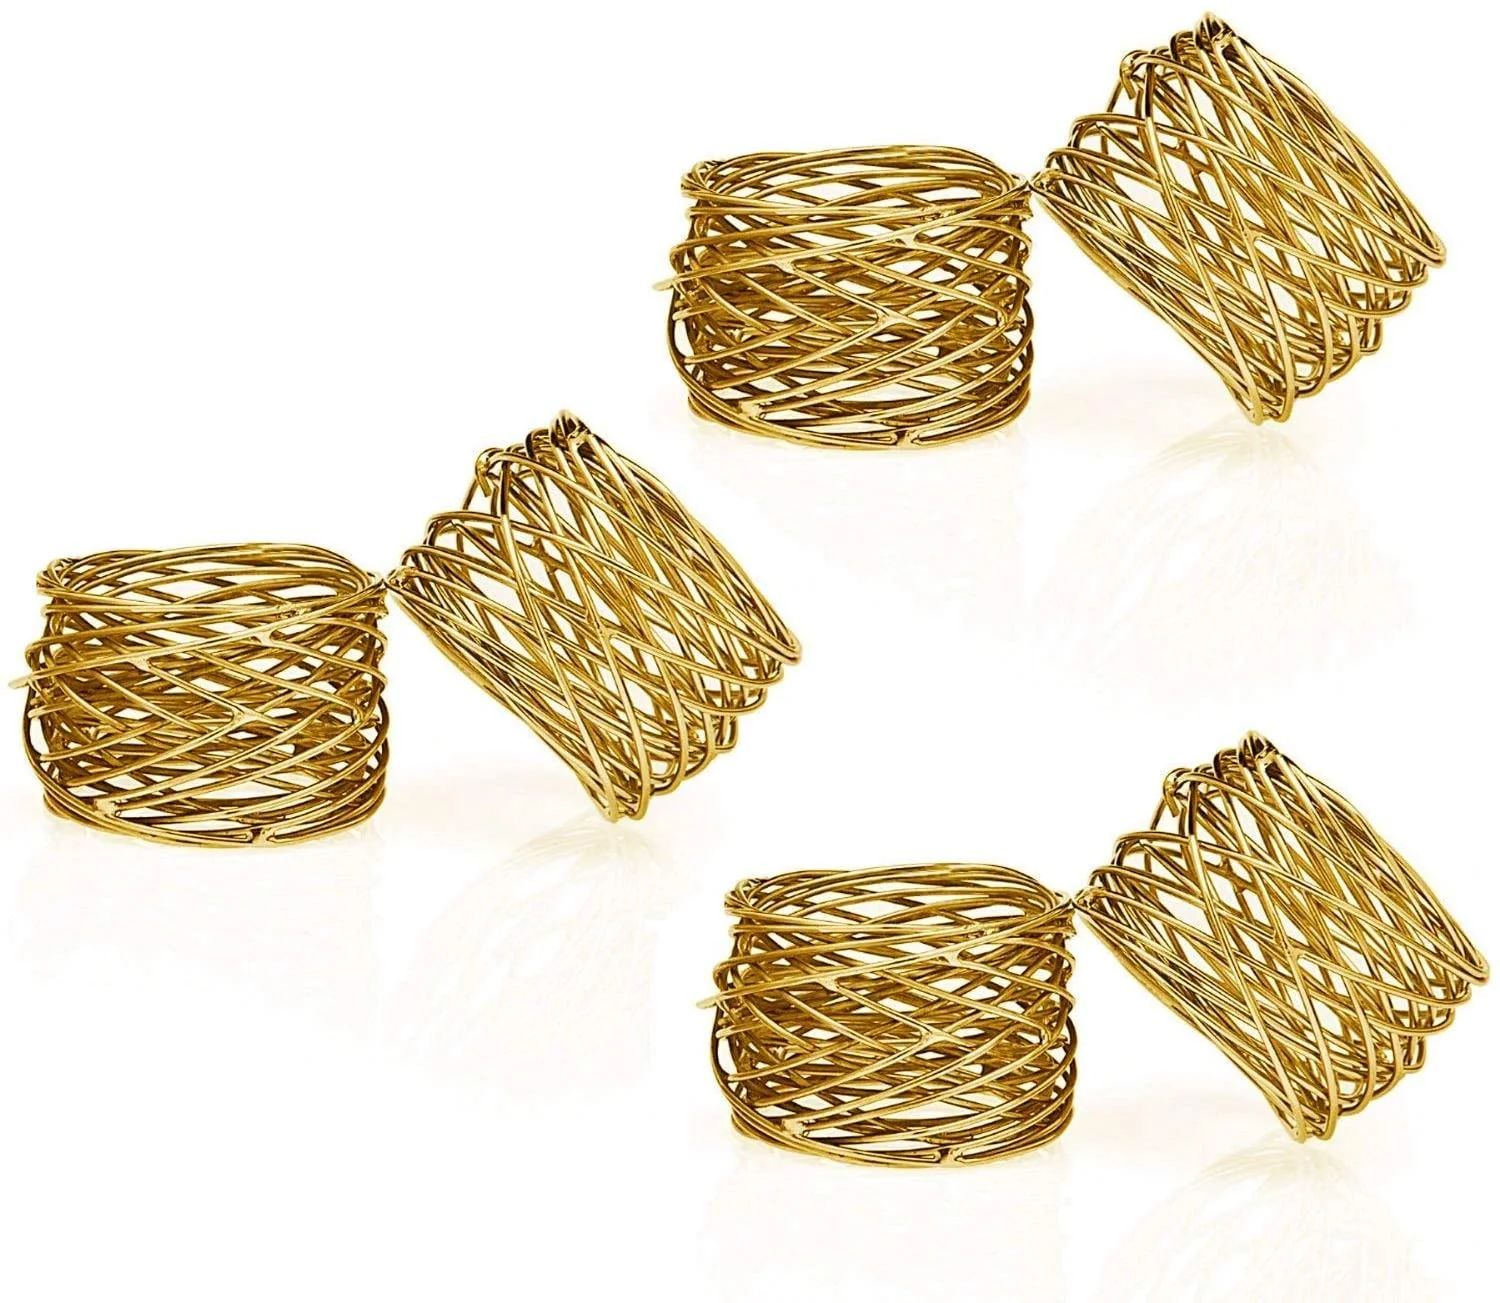 Handmade Round Mesh Napkin Rings Holder for Dinning Table Parties Everyday, Set of 6 (Gold) | Walmart (US)